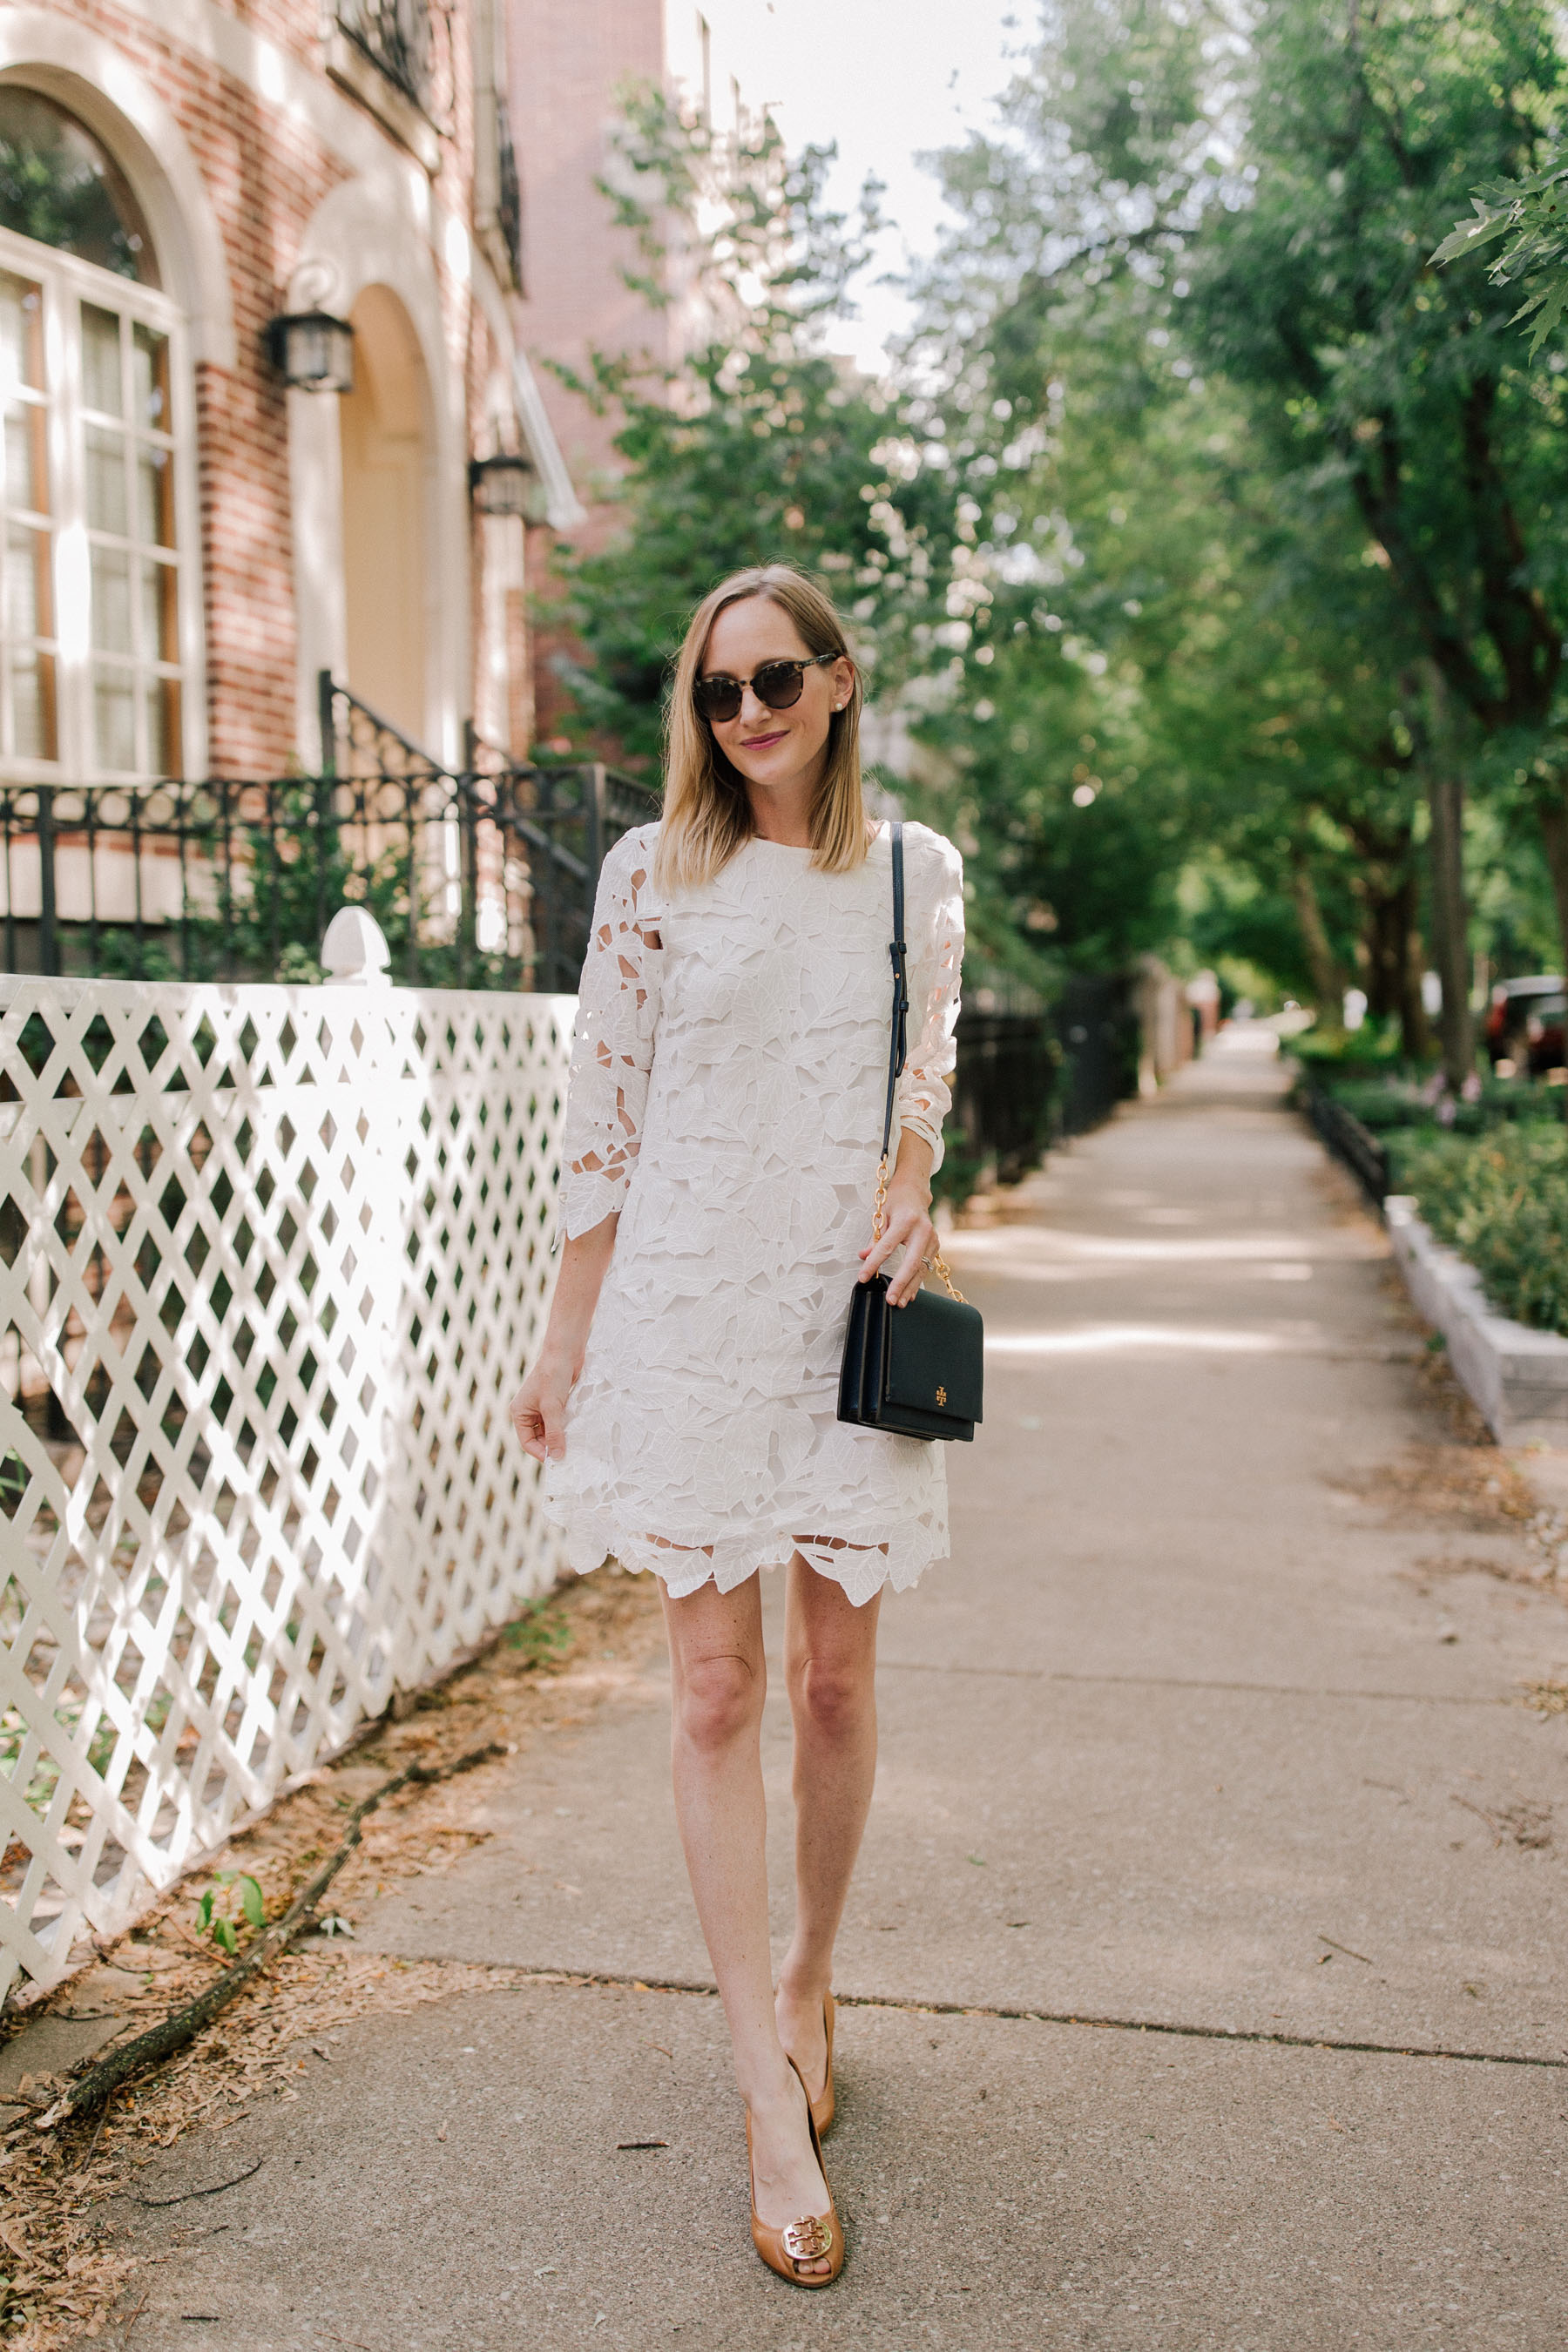 White Lace Dress / Tory Burch Navy Bag / Tory Burch Wedges - Nordstrom - Kelly in the City